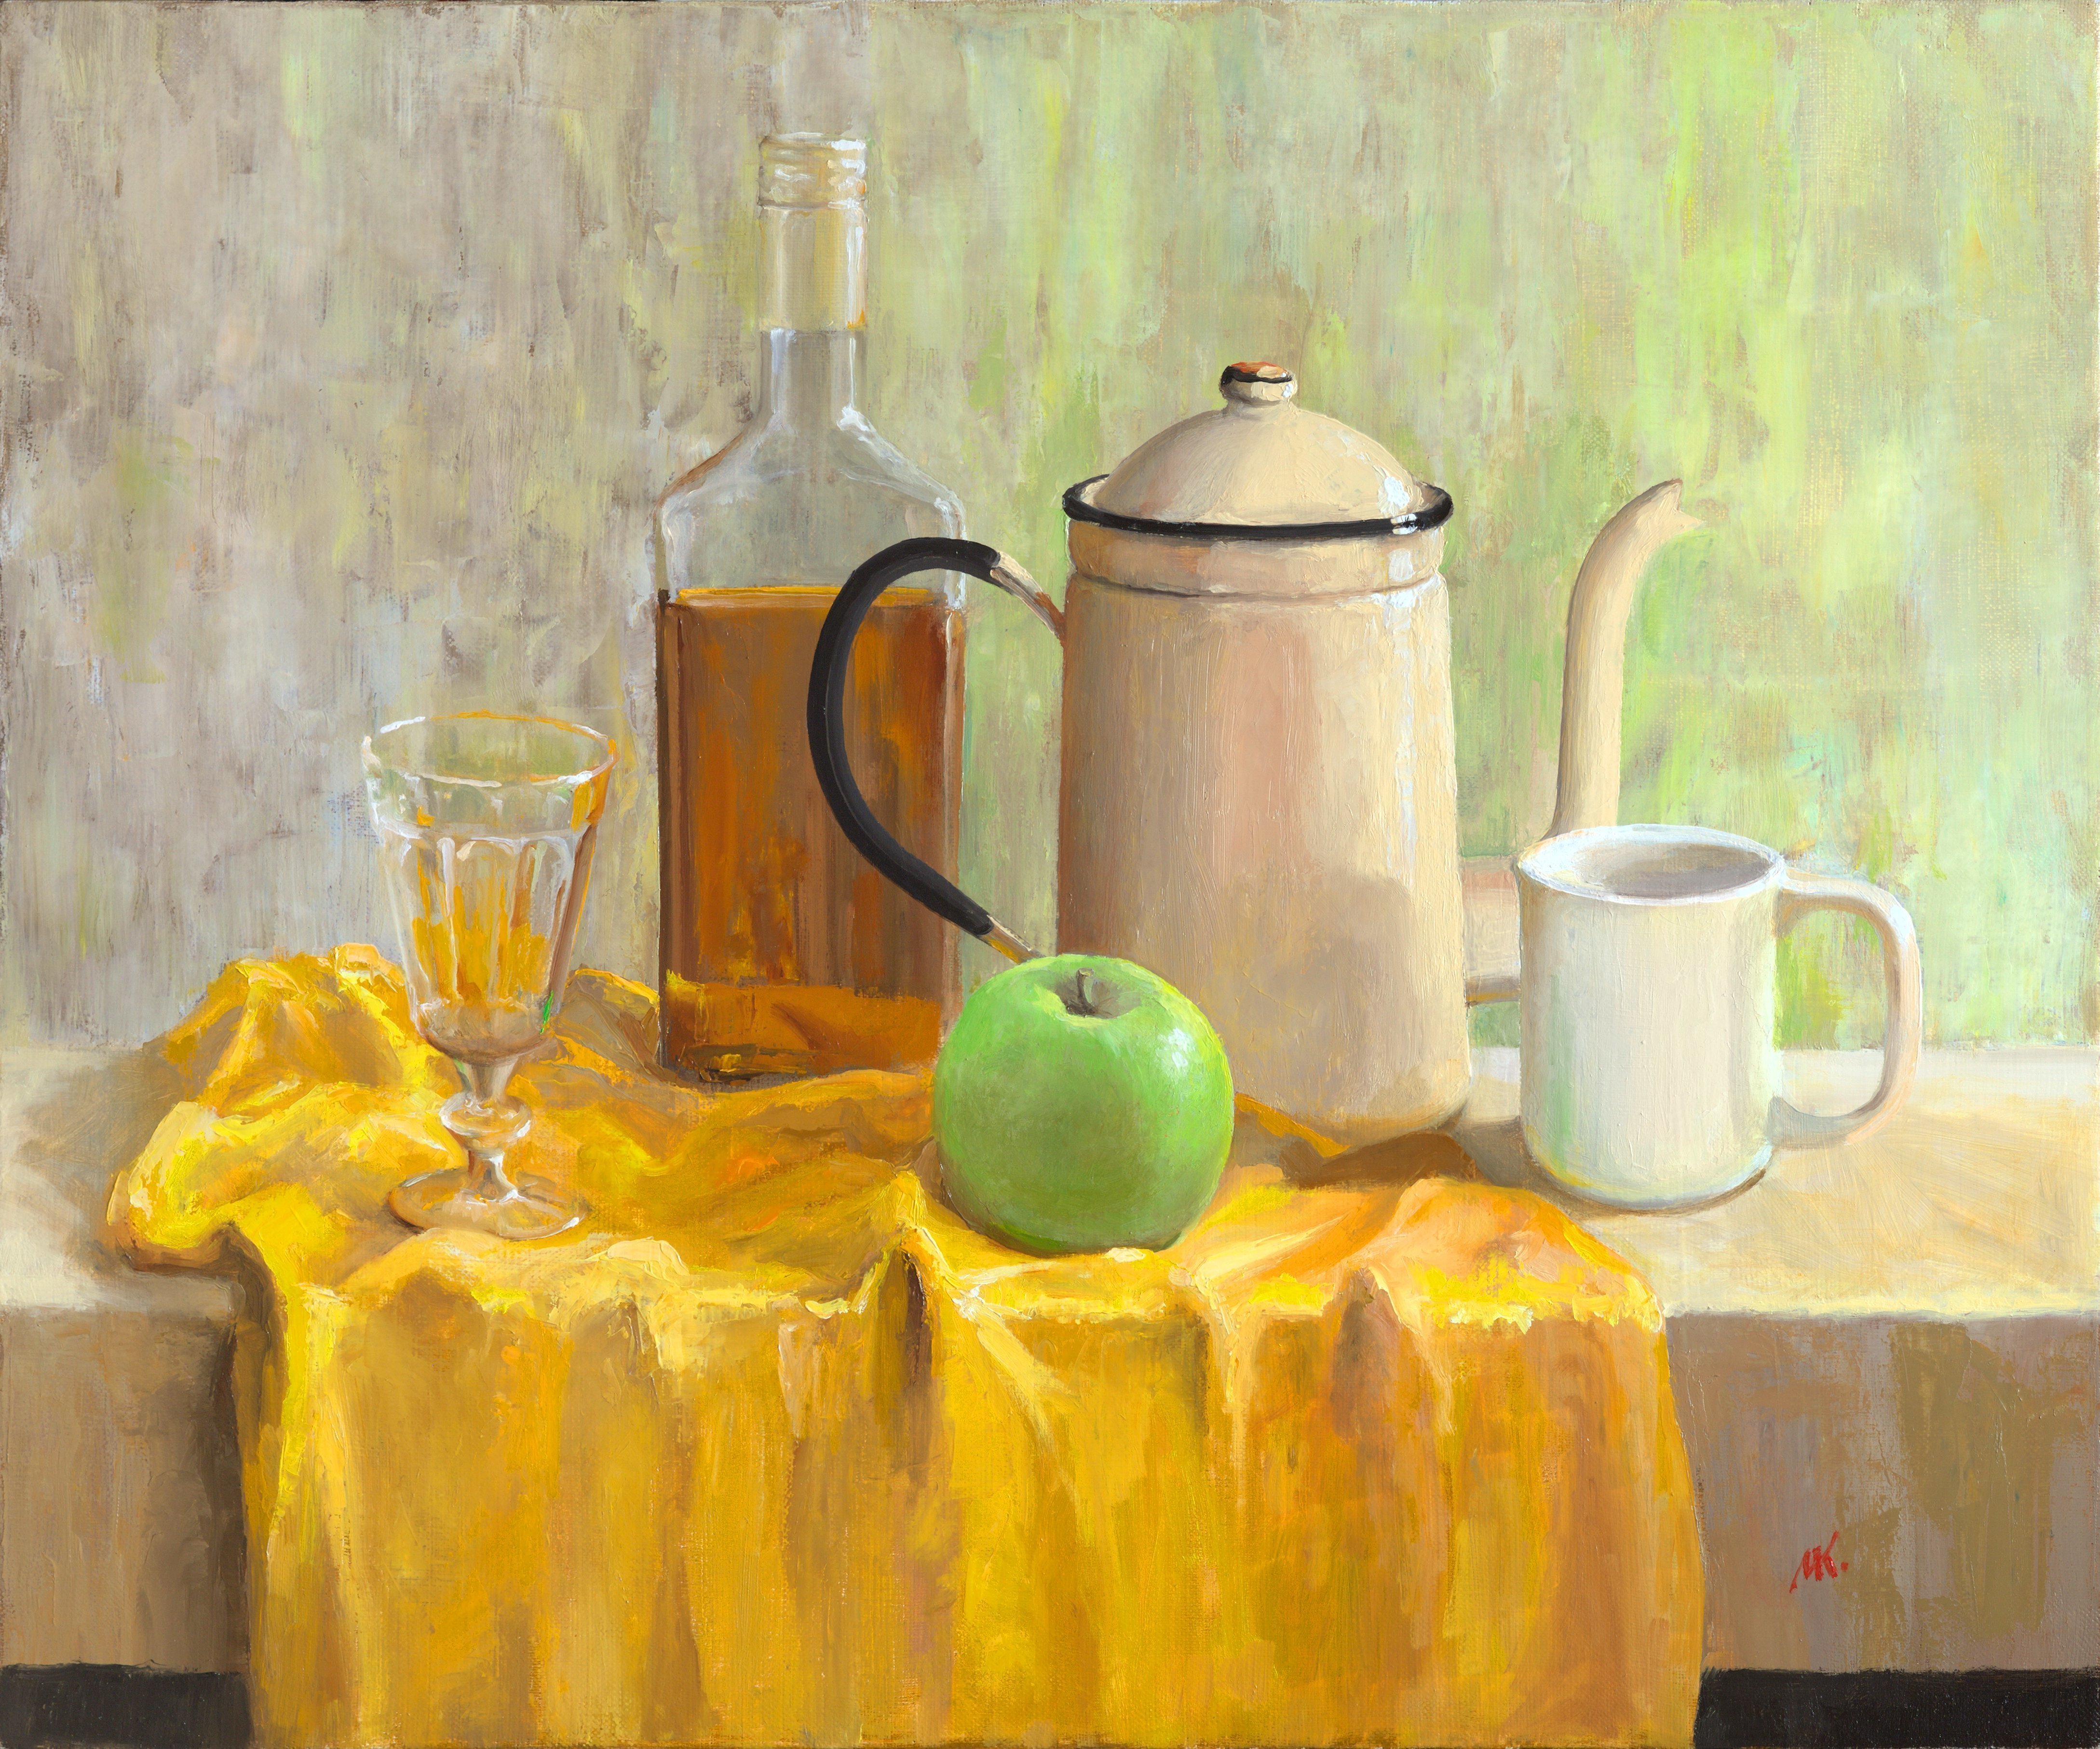 Mikhail Velavok; Green Apple, 2017, Original Painting Oil, 23.6 x 19.7 inches. Artwork description: 241 Original oil on canvas stretched on a wooden underframe. The artwork is being sold unframed. The frame in the additional photo is an example only.still life, apple, green apple, mug, cup, glass, wineglass, bottle, bottle glass, alcohol, coffeepot, coffee pot, wrinkle, fold, yellow, fabric...